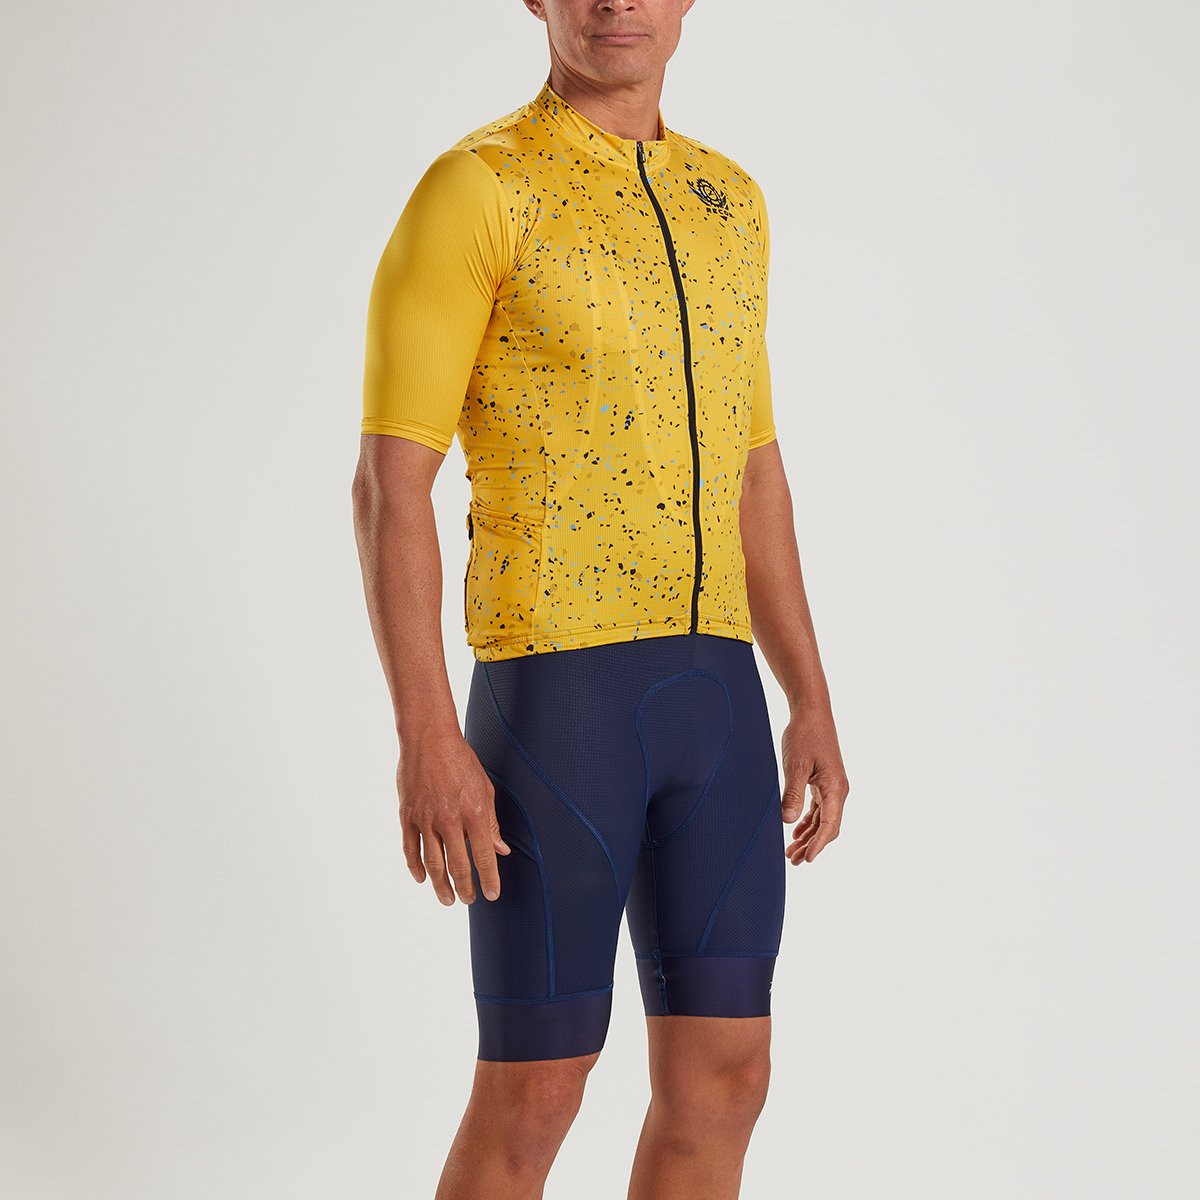 Zoot Sports CYCLE APPAREL M RECON CYCLE JERSEY - SULPHER